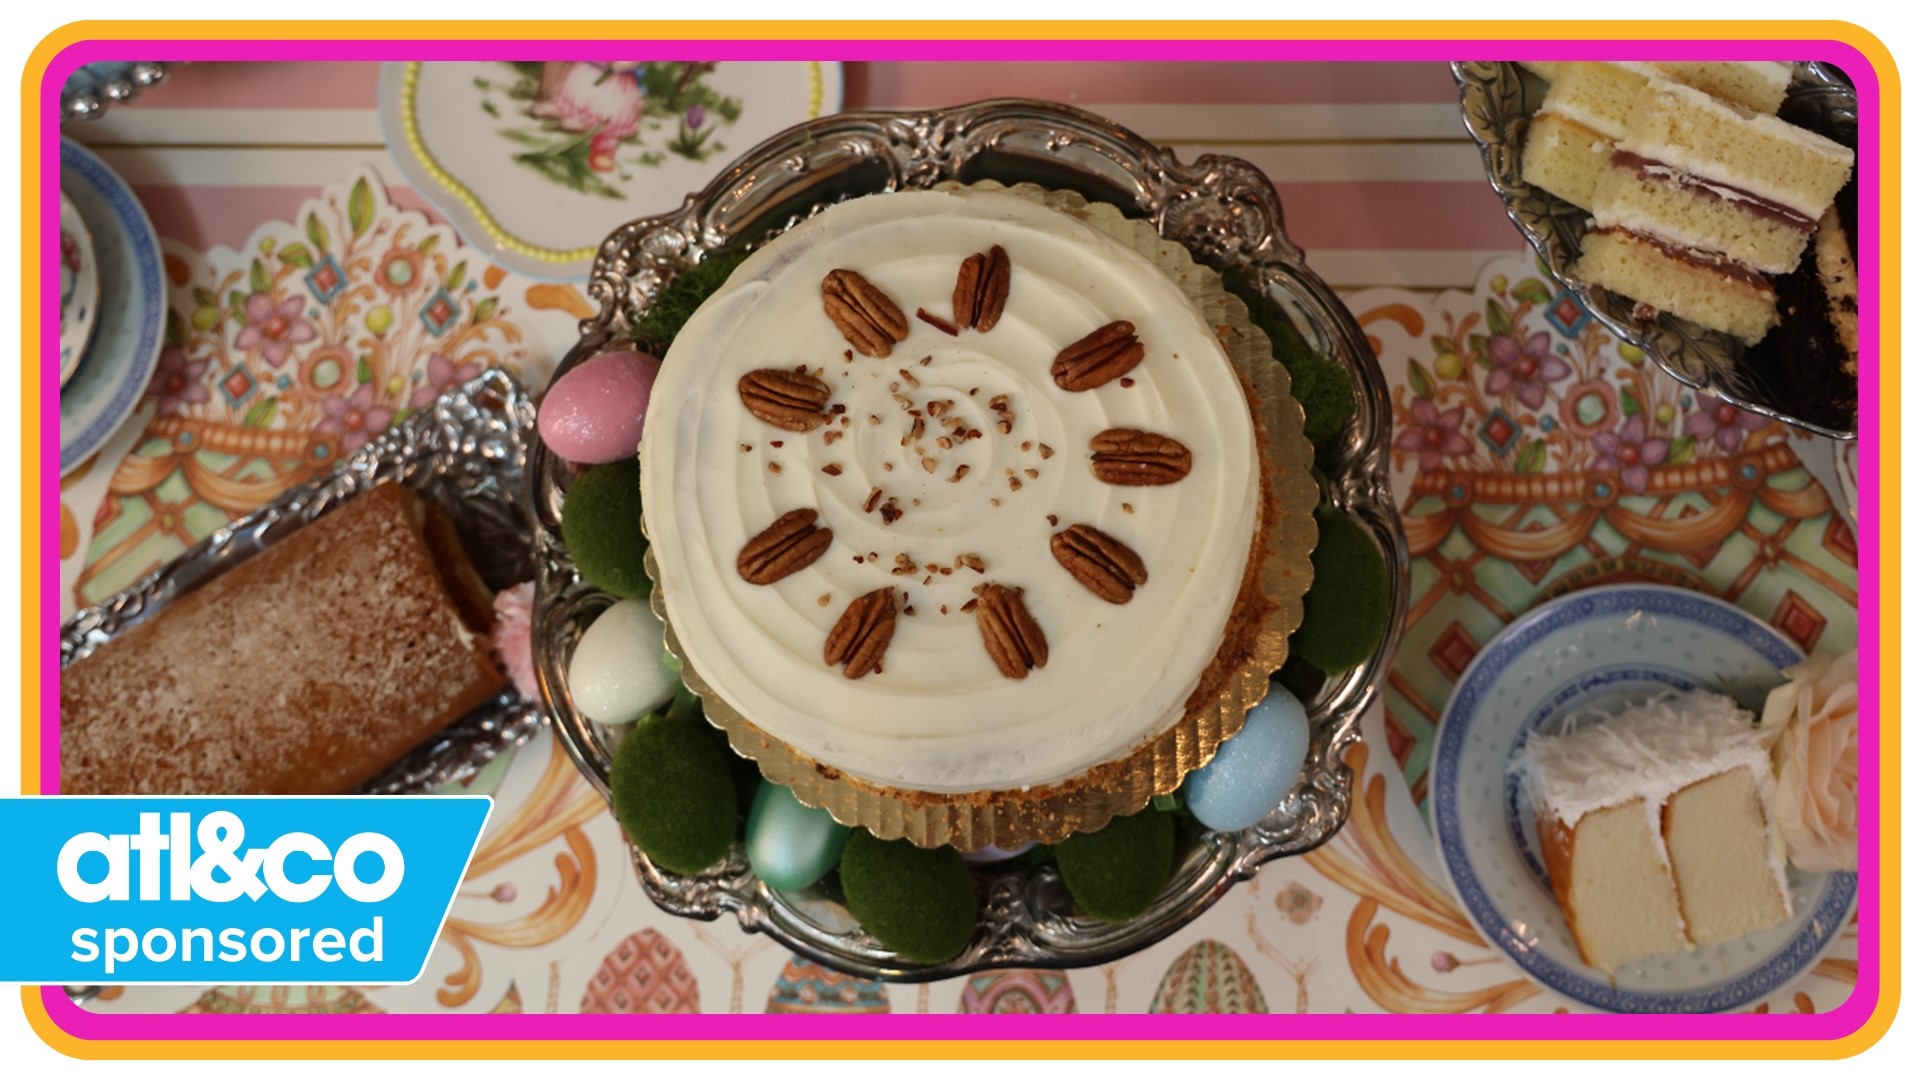 Spruce up your spring gatherings with these dessert displays. More information on southerntableshow.com | PAID CONTENT